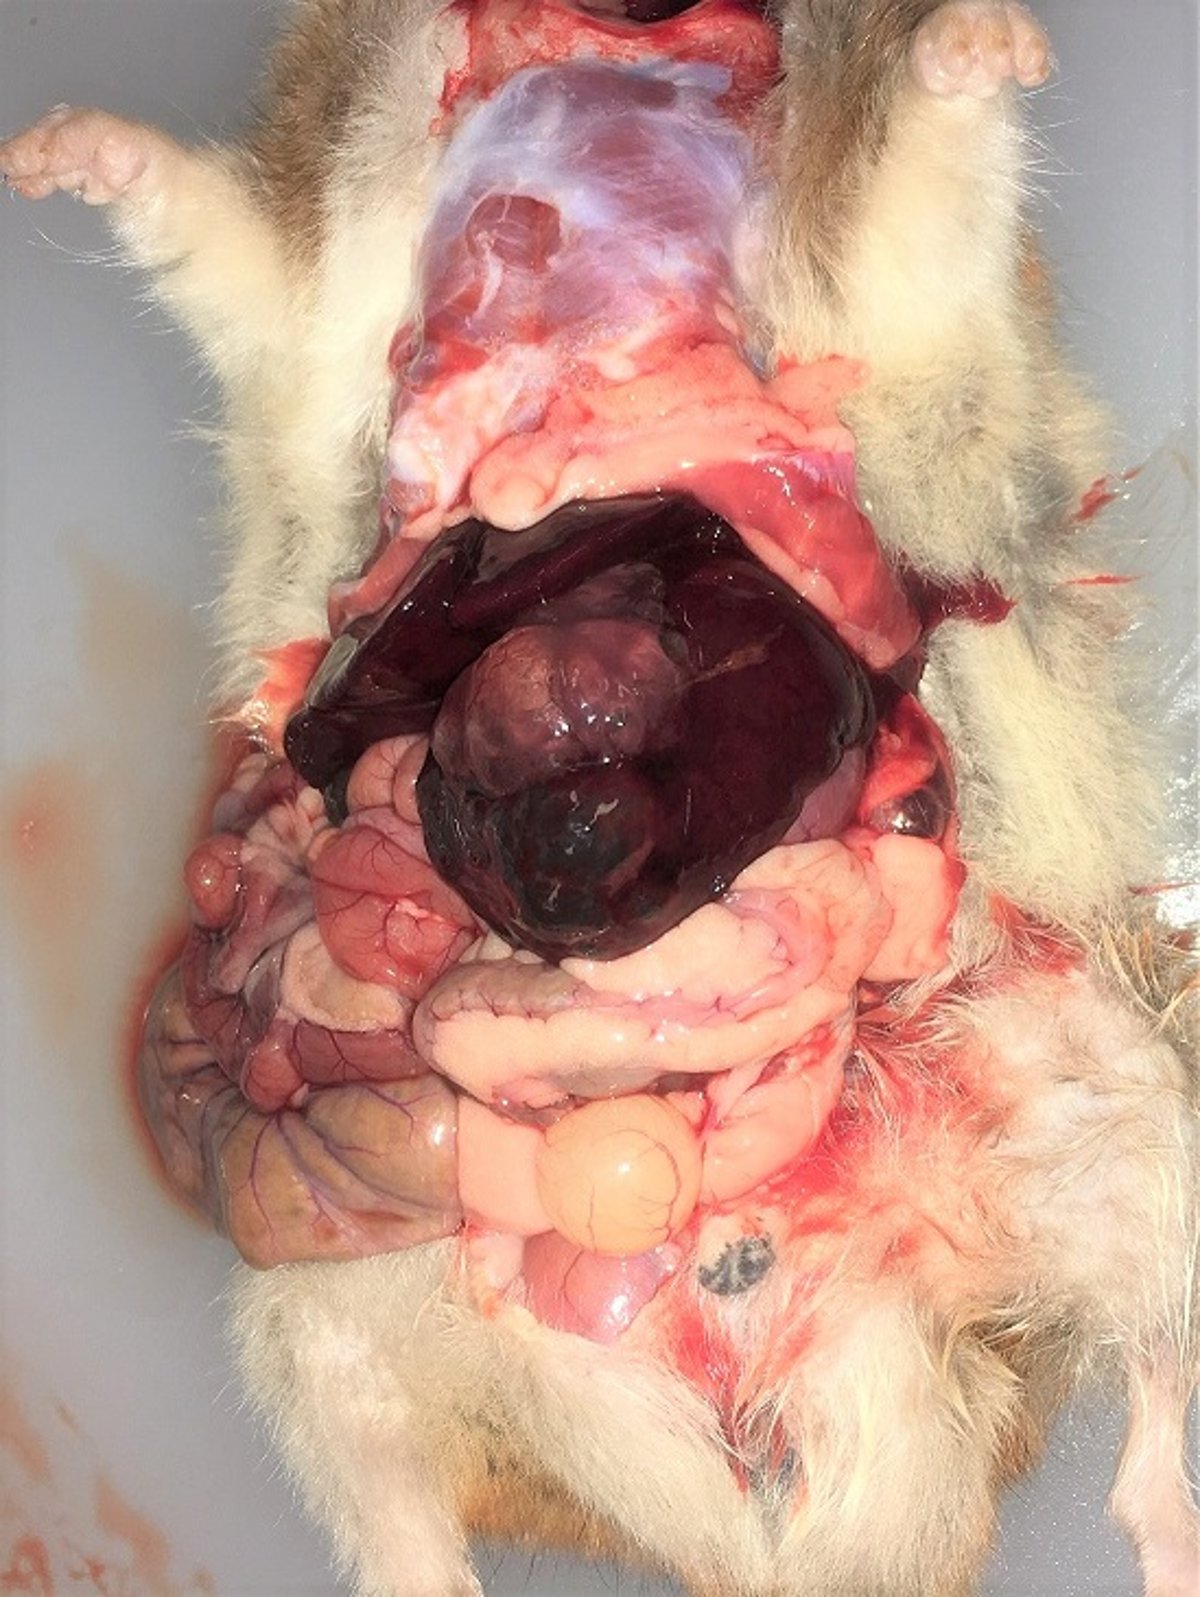 Polycystic liver disease, Syrian hamster